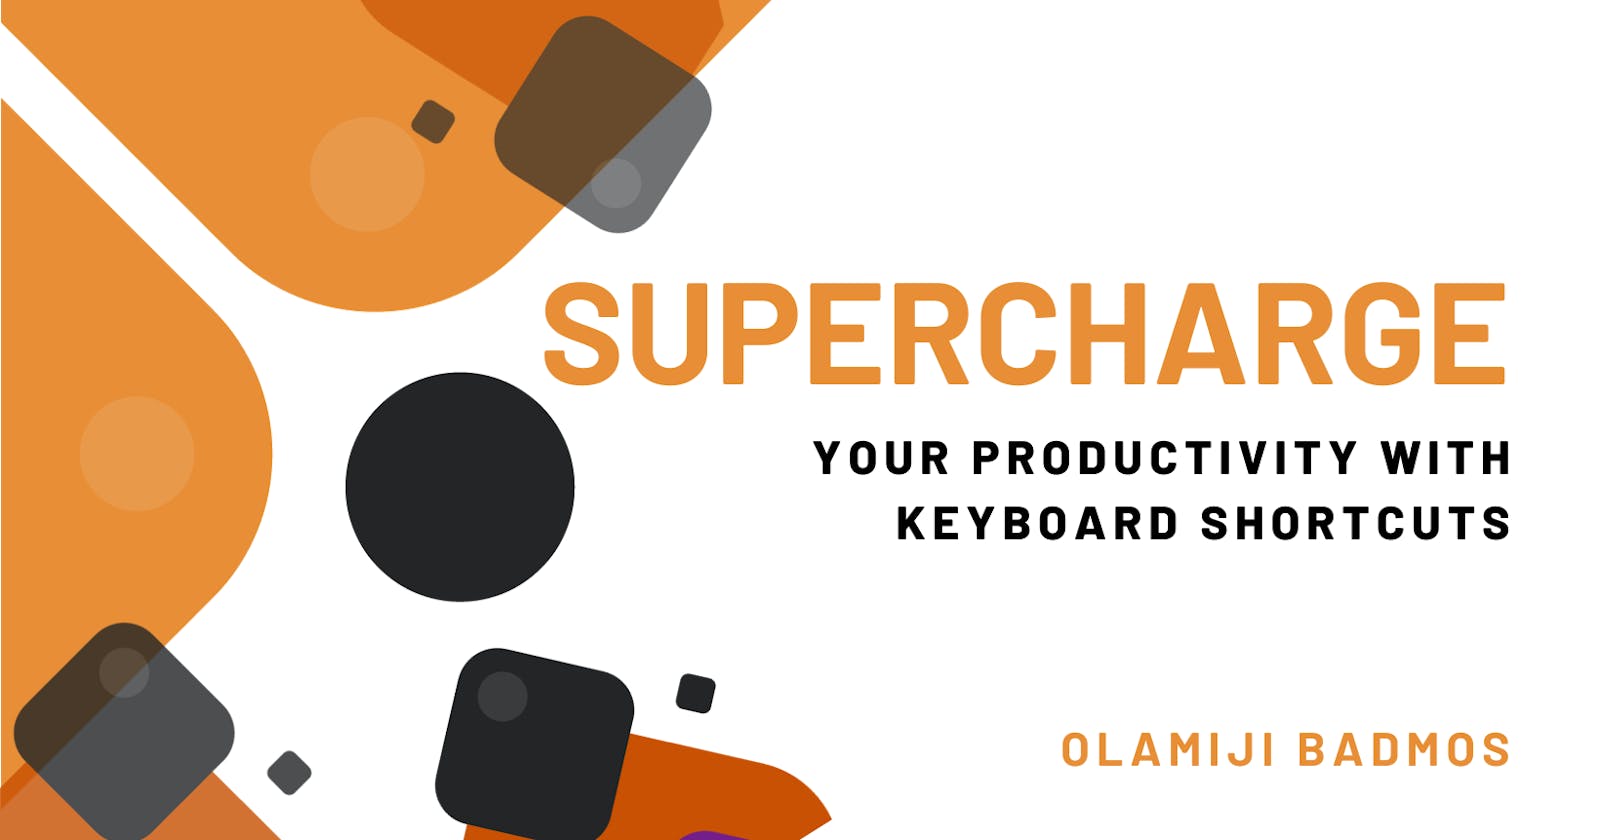 Supercharge your productivity with keyboard shortcuts